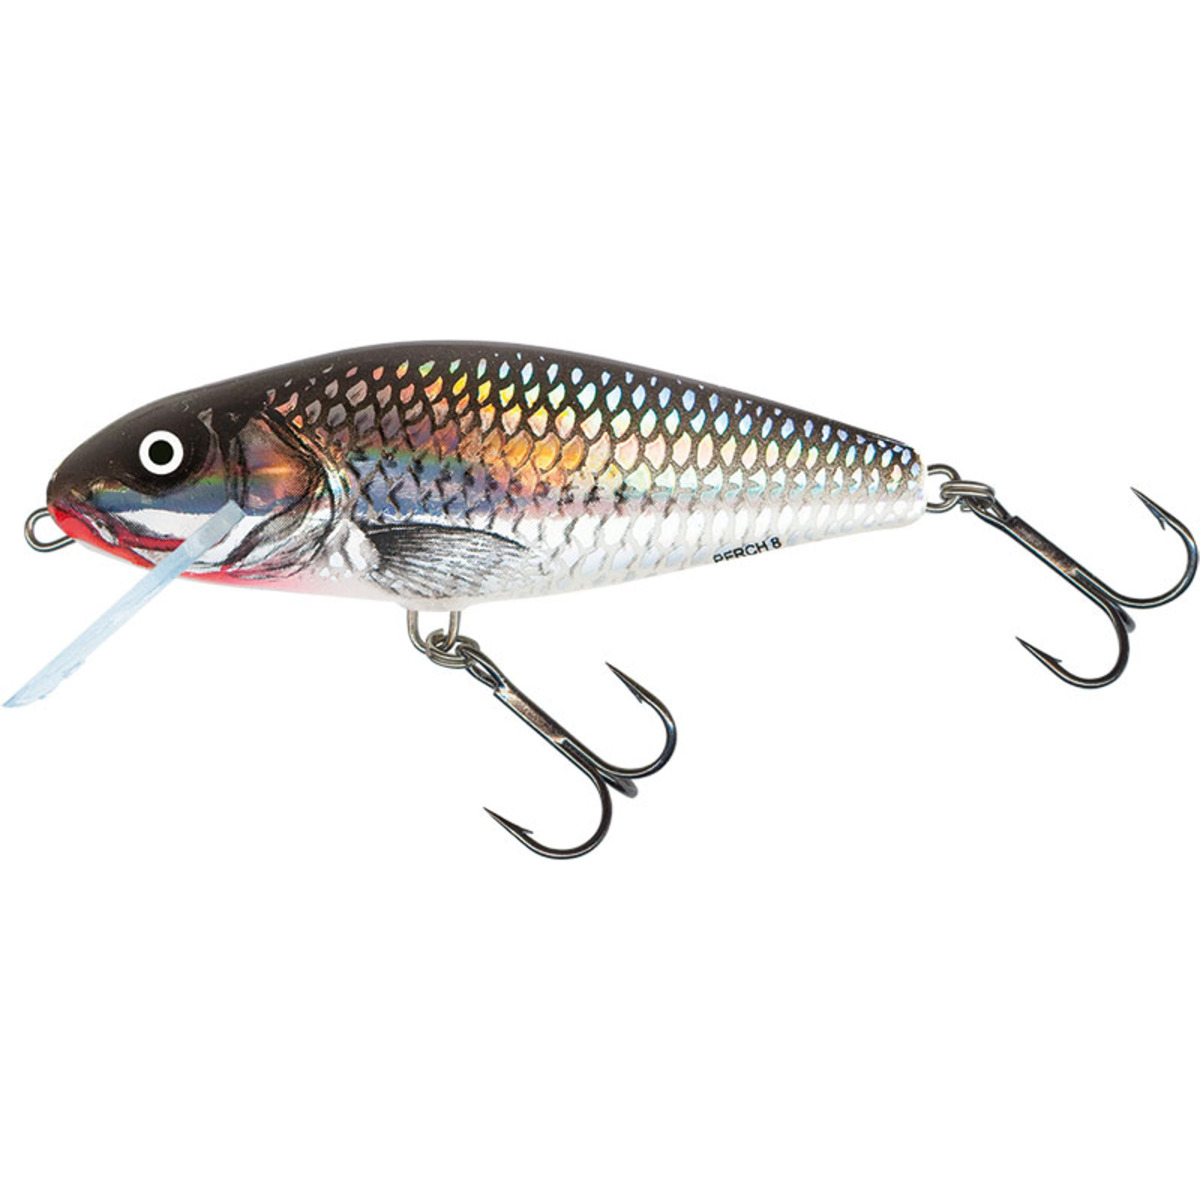 Salmo Perch Shallow Runner - 14 Cm - Holographic Grey Shiner